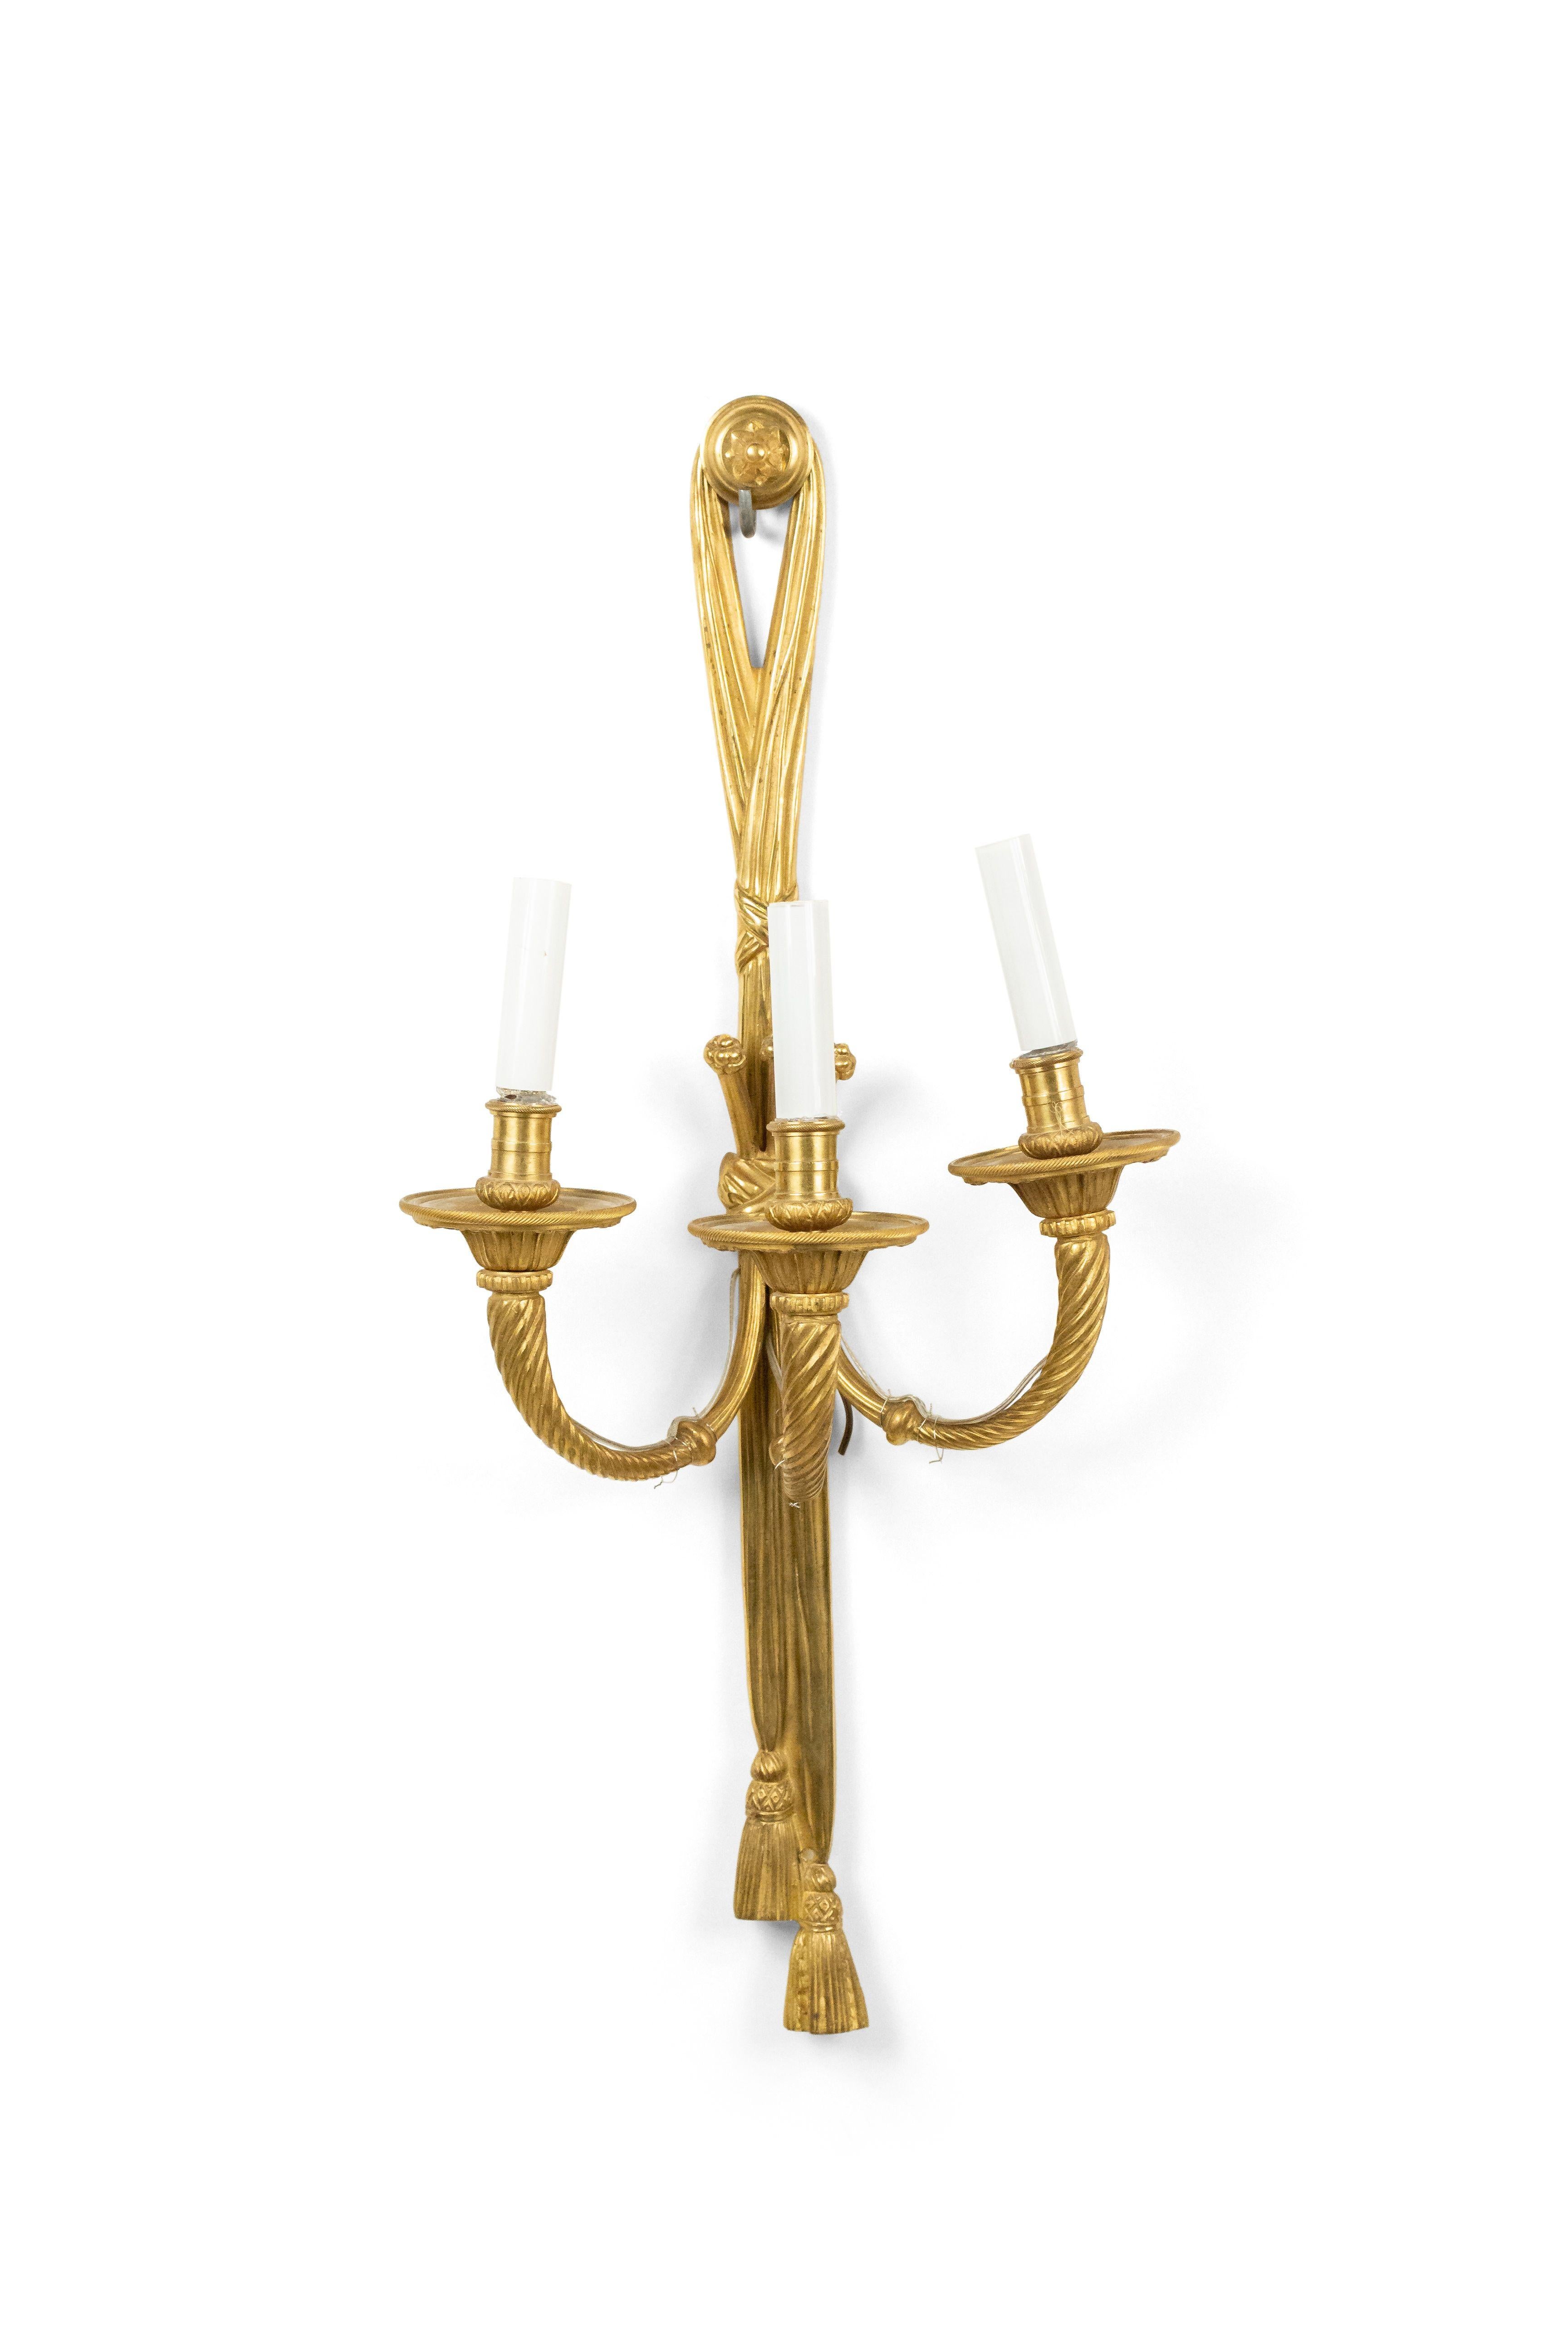 French Louis XVI Style Bronze Dore Wall Sconces 3